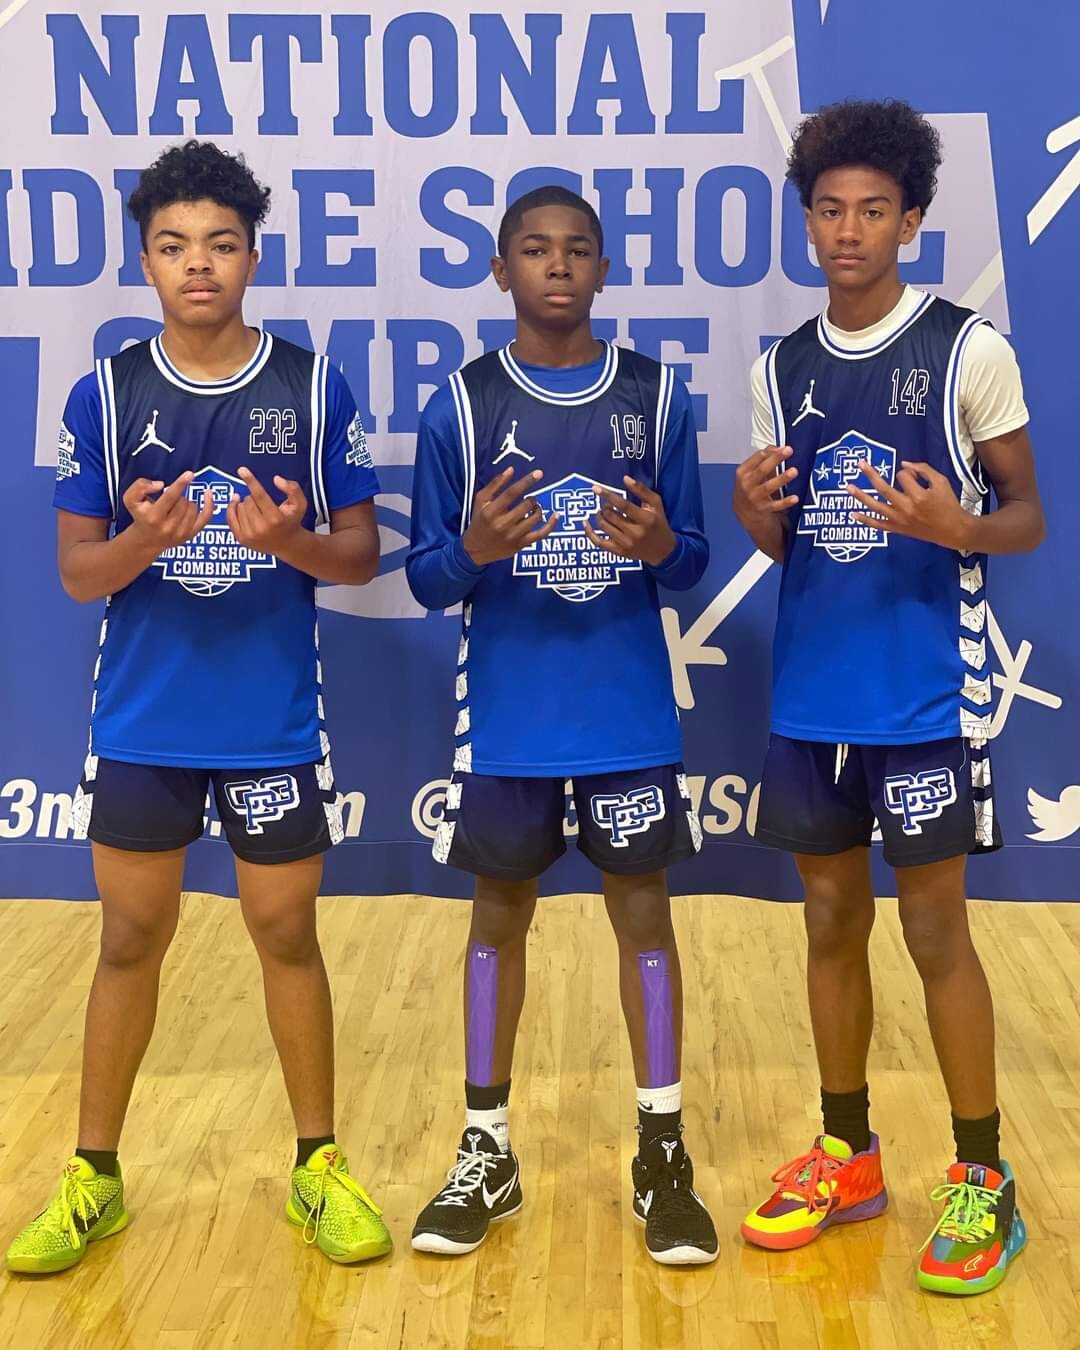 Malak and 2 teammates at an Invite only CP3 Combine